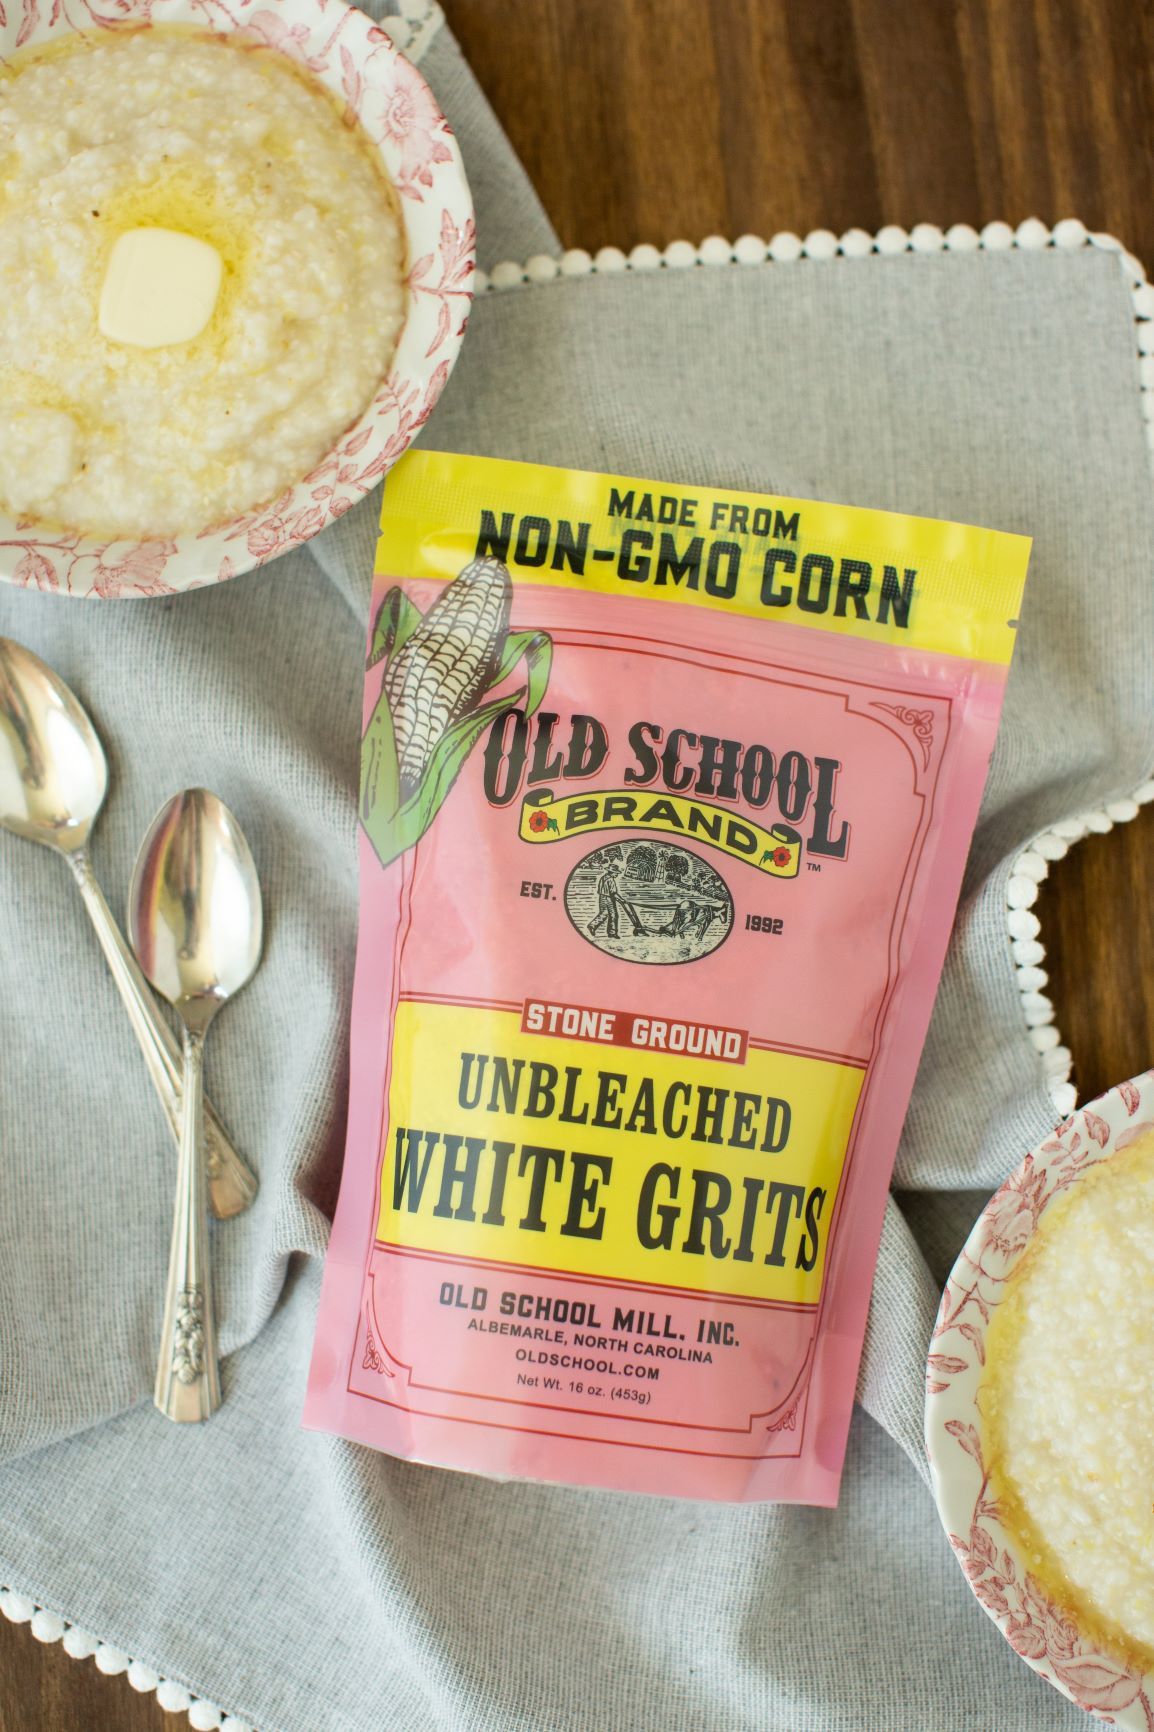 Old School Mill, Inc. – Crafter Of Authentic Foods